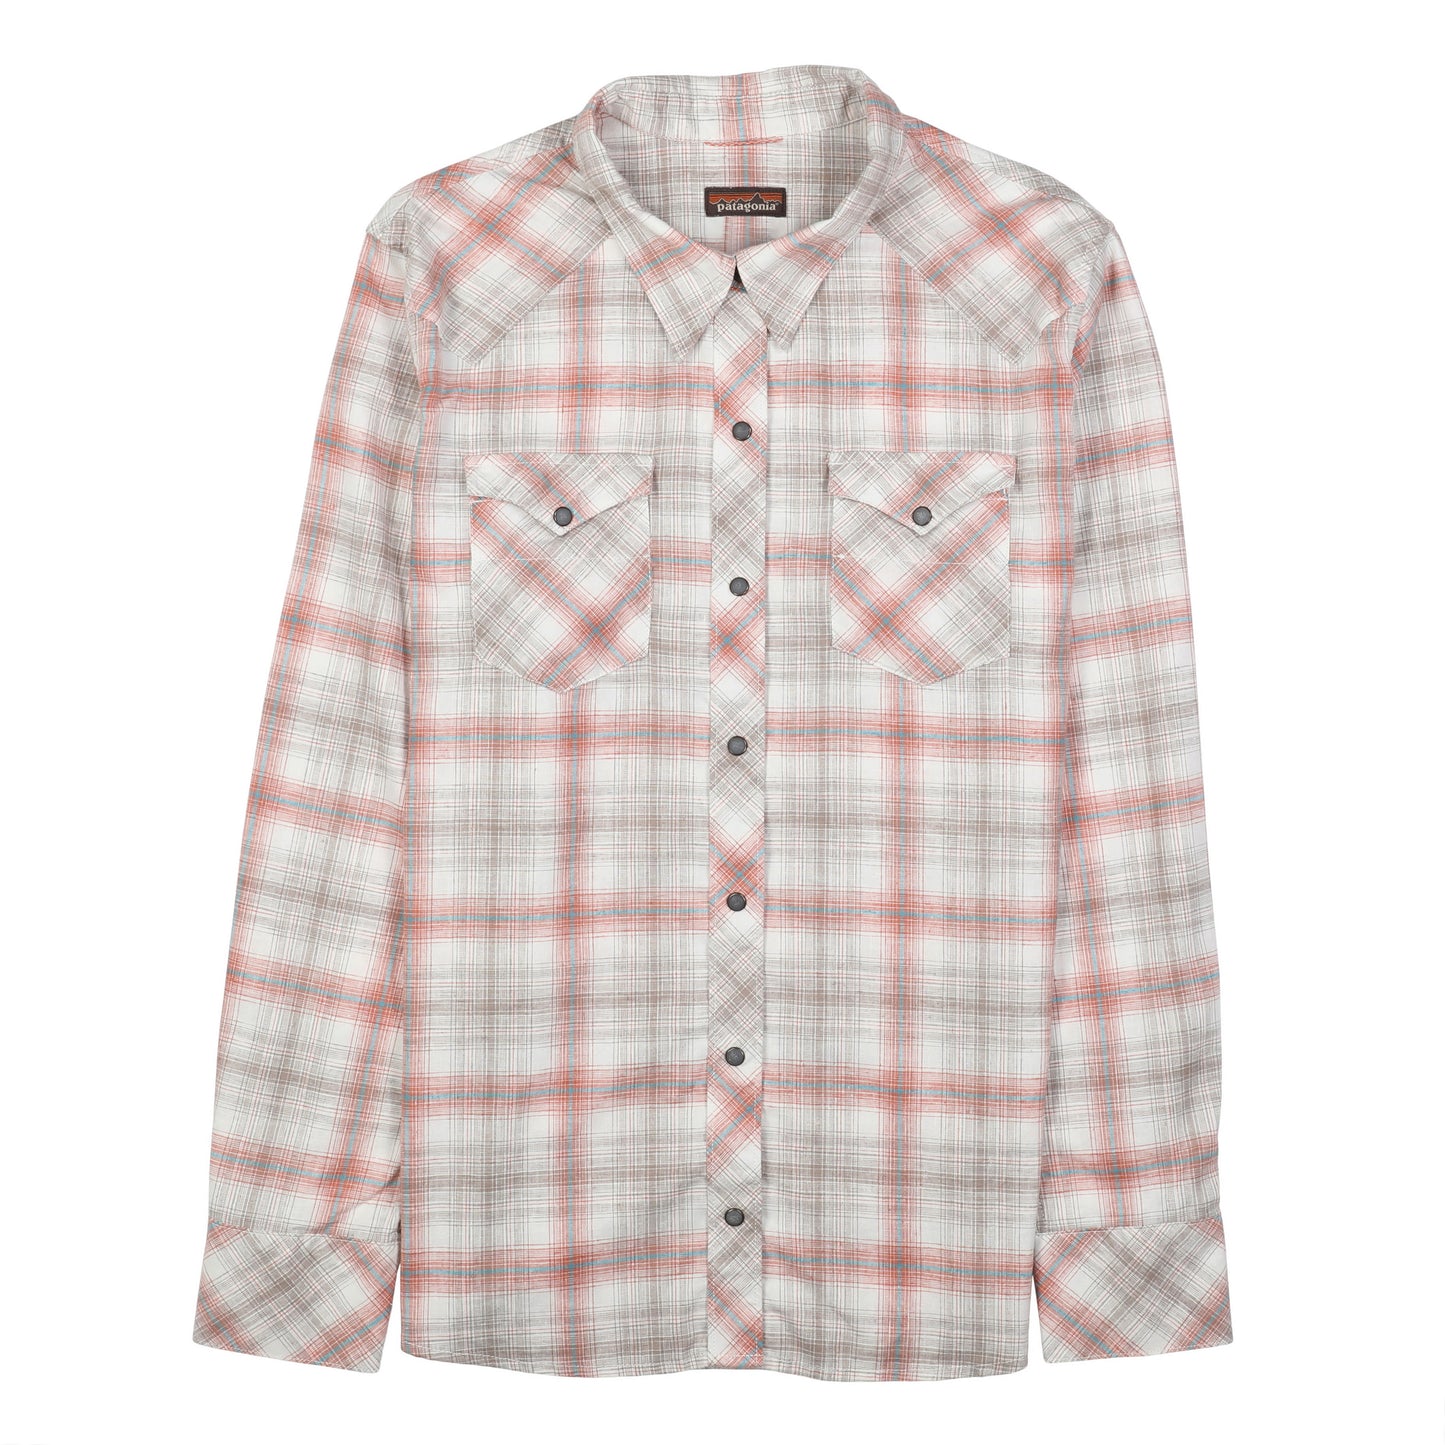 W's Long-Sleeved Western Snap Shirt